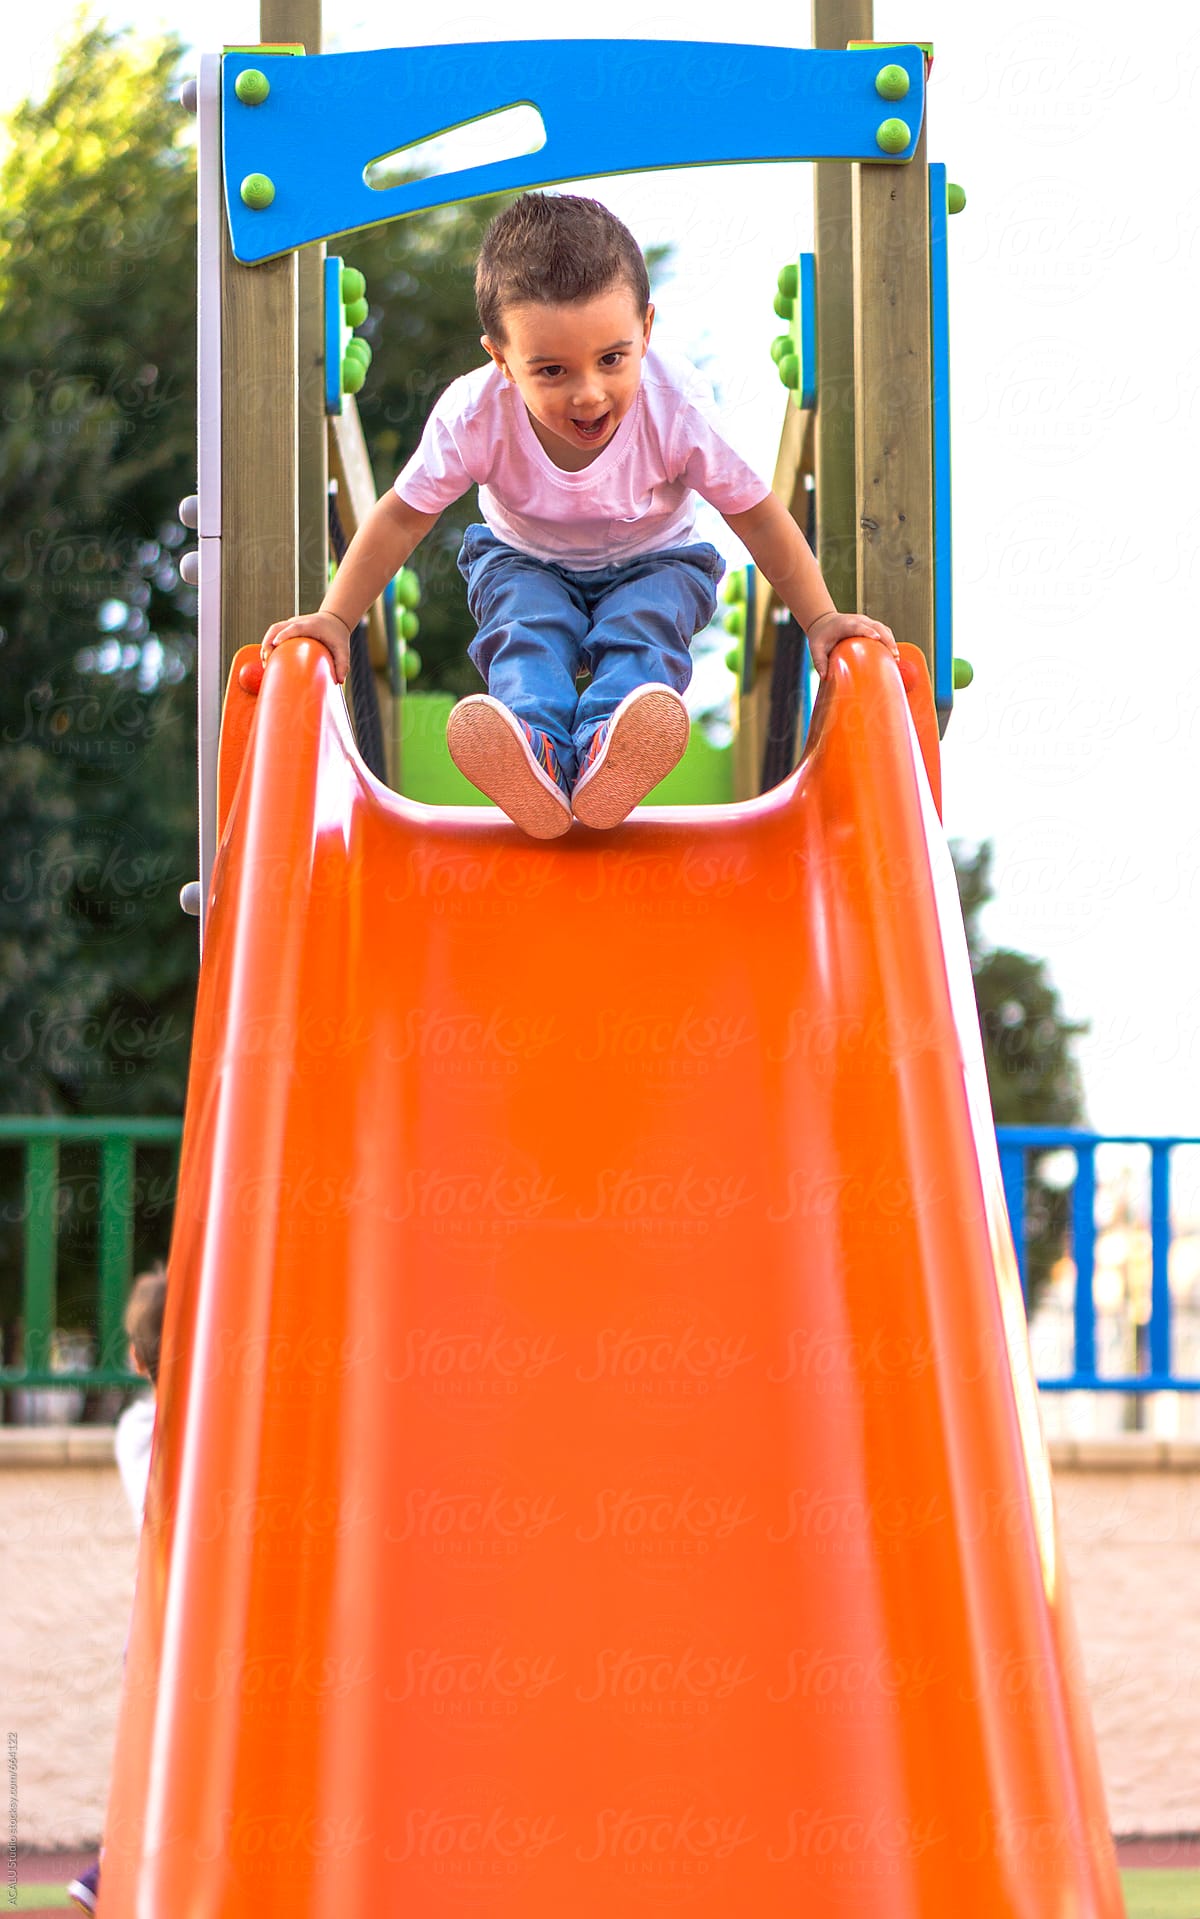 Child Sliding Down A Slide In A Playground by Stocksy Contributor